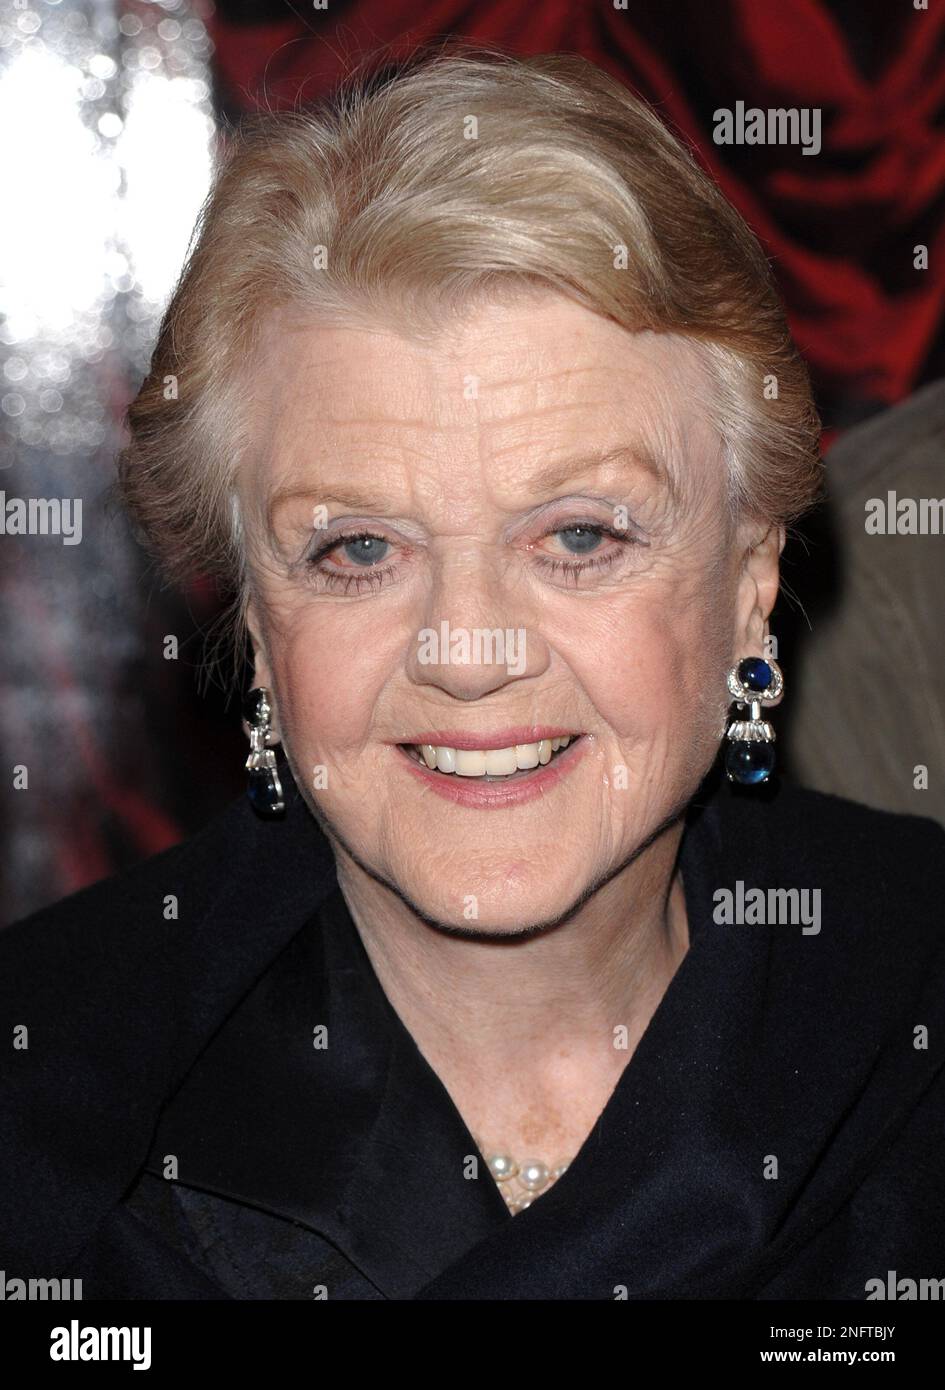 Actress Angela Lansbury arrives at the opening night of 